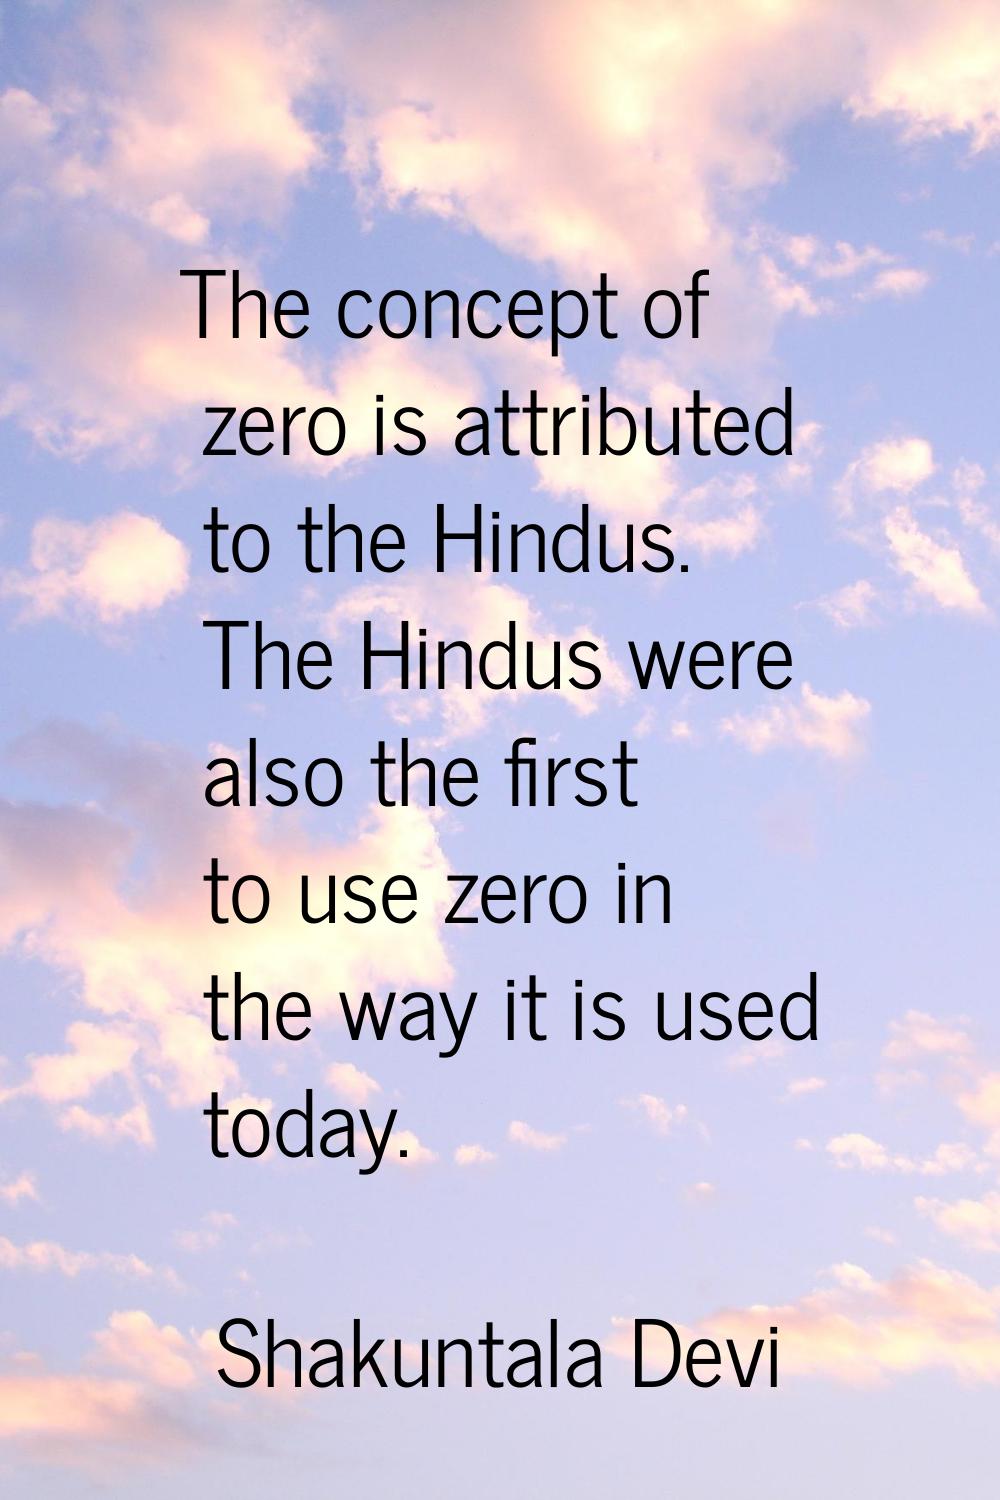 The concept of zero is attributed to the Hindus. The Hindus were also the first to use zero in the 